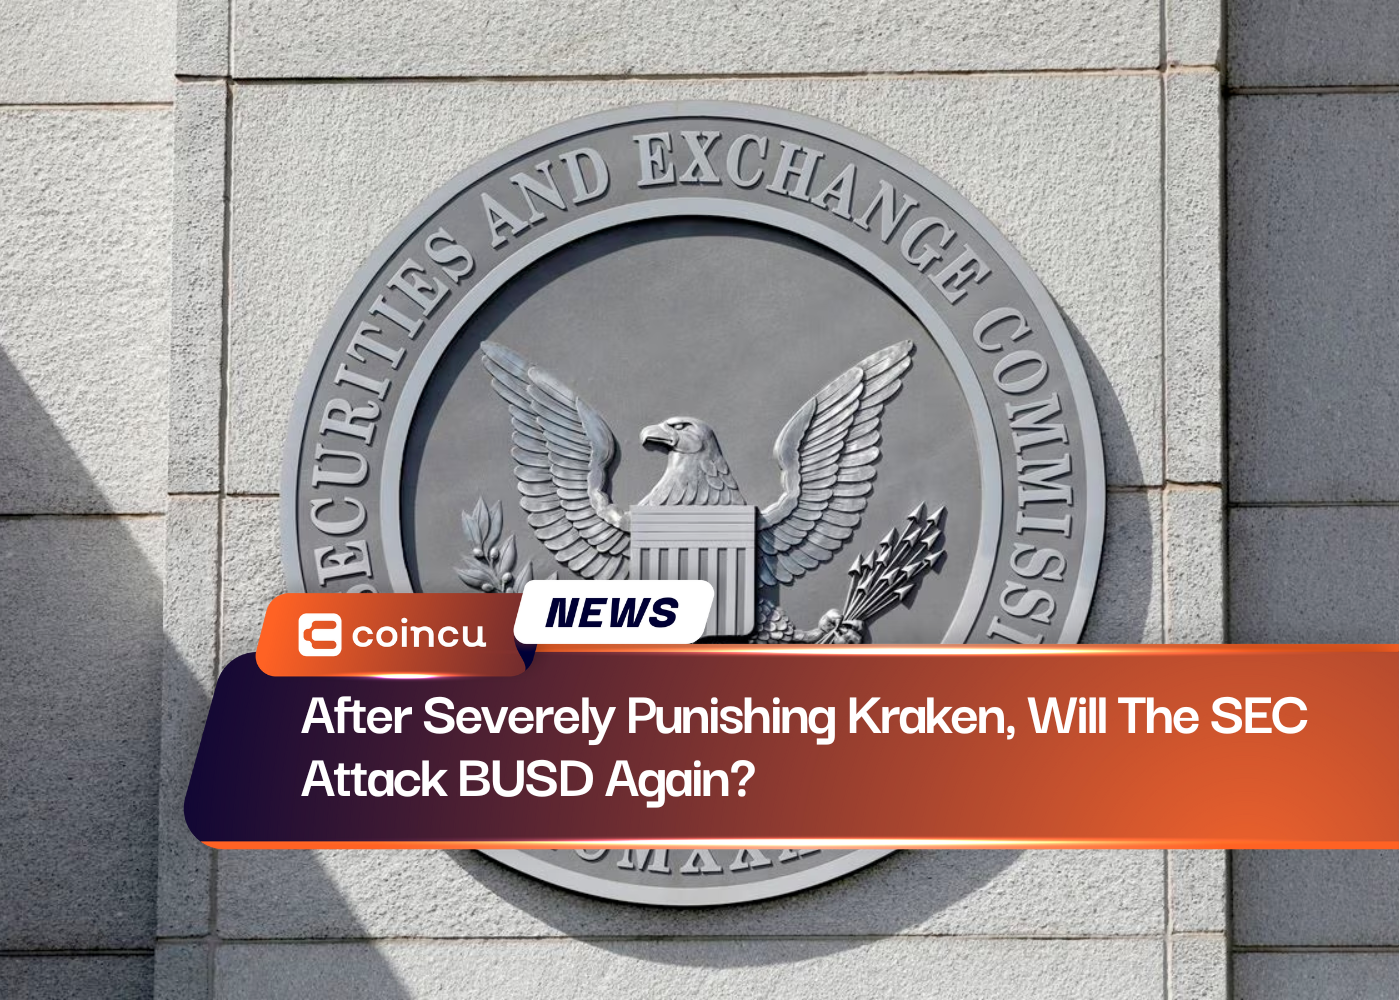 After Severely Punishing Kraken, Will The SEC Attack BUSD Again?